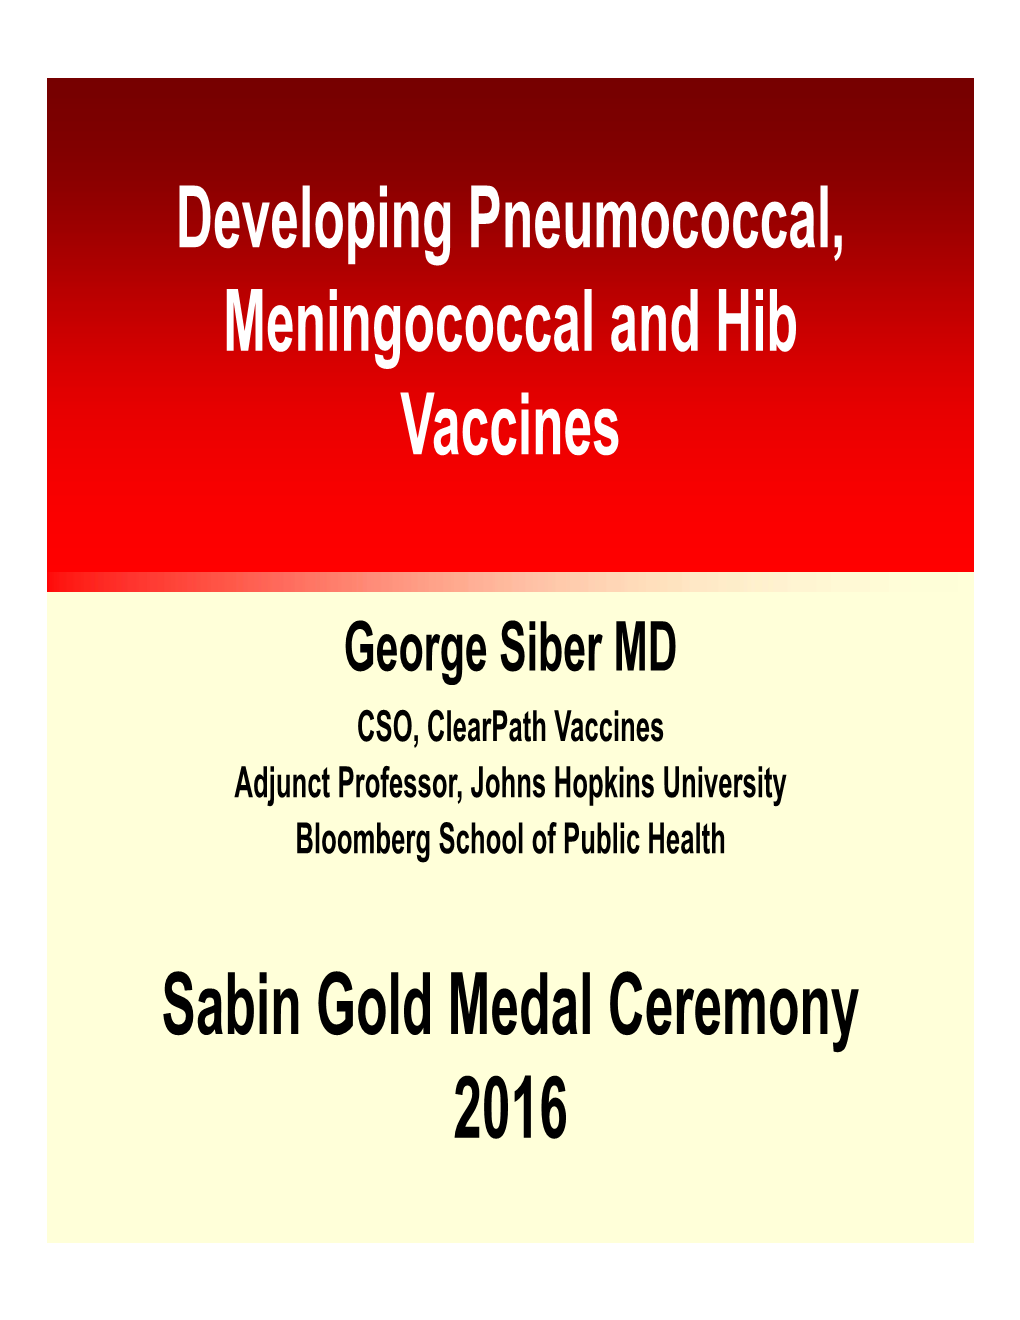 Developing Pneumococcal, Meningococcal and Hib Vaccines